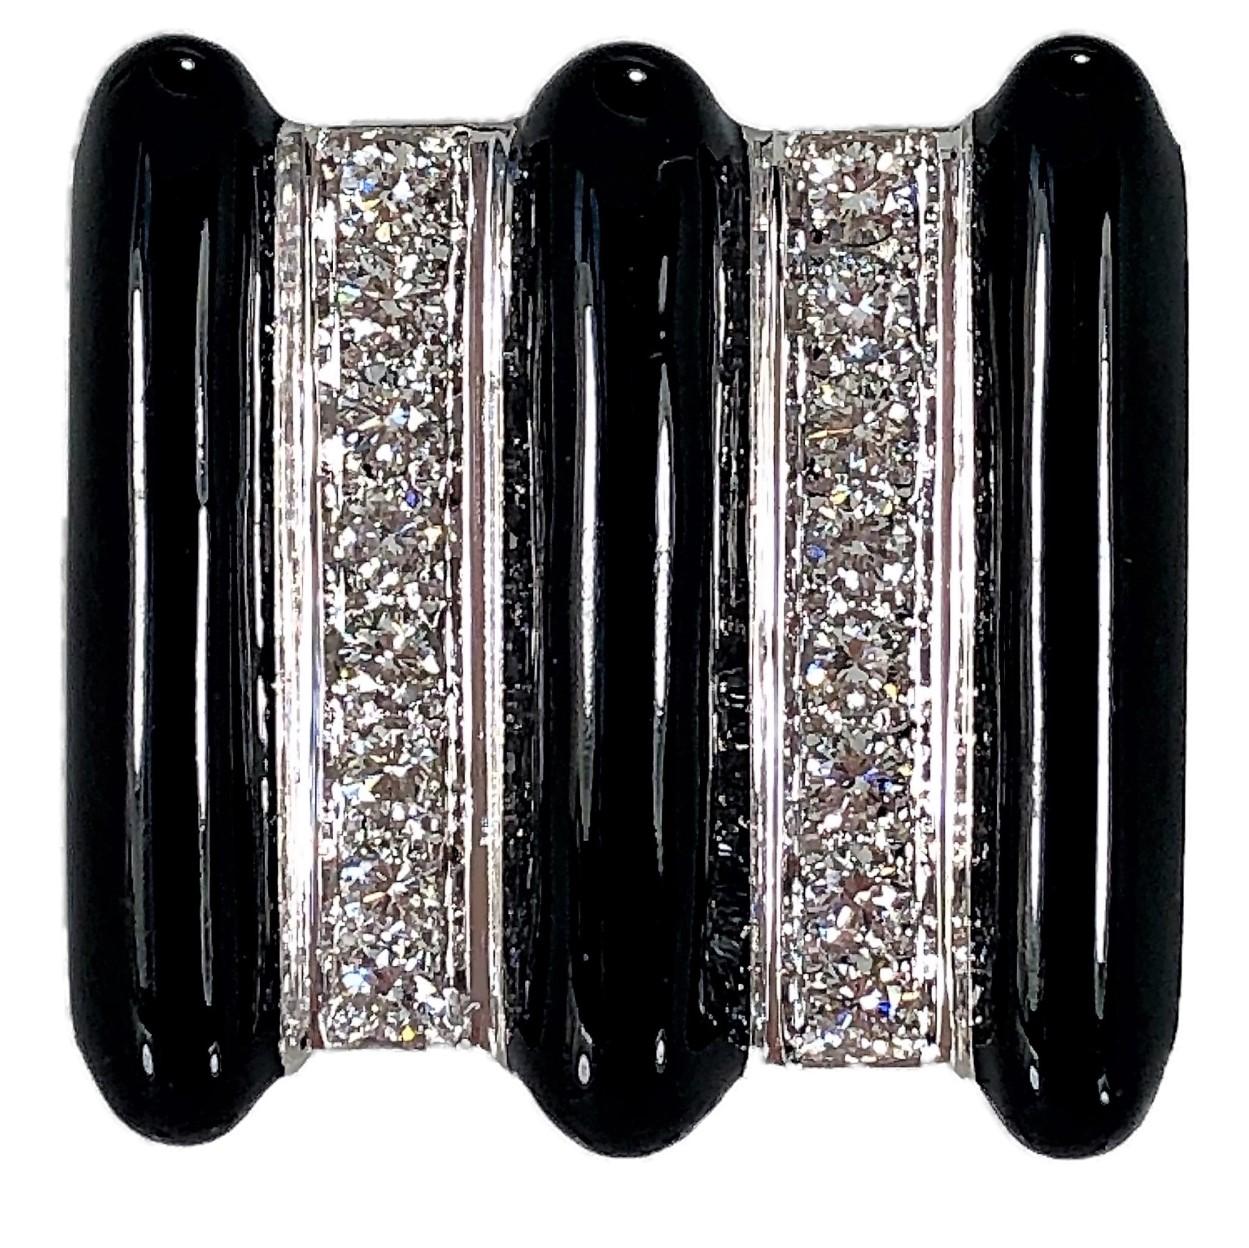 Made of 18K white gold with black enamel accents and set
with 16 round brilliant cut diamonds weighing an approximate
total of 1.00CT of overall G Color and VS1 Clarity. This large
scale, vertical design ring measures 1 inch by 1 inch across the